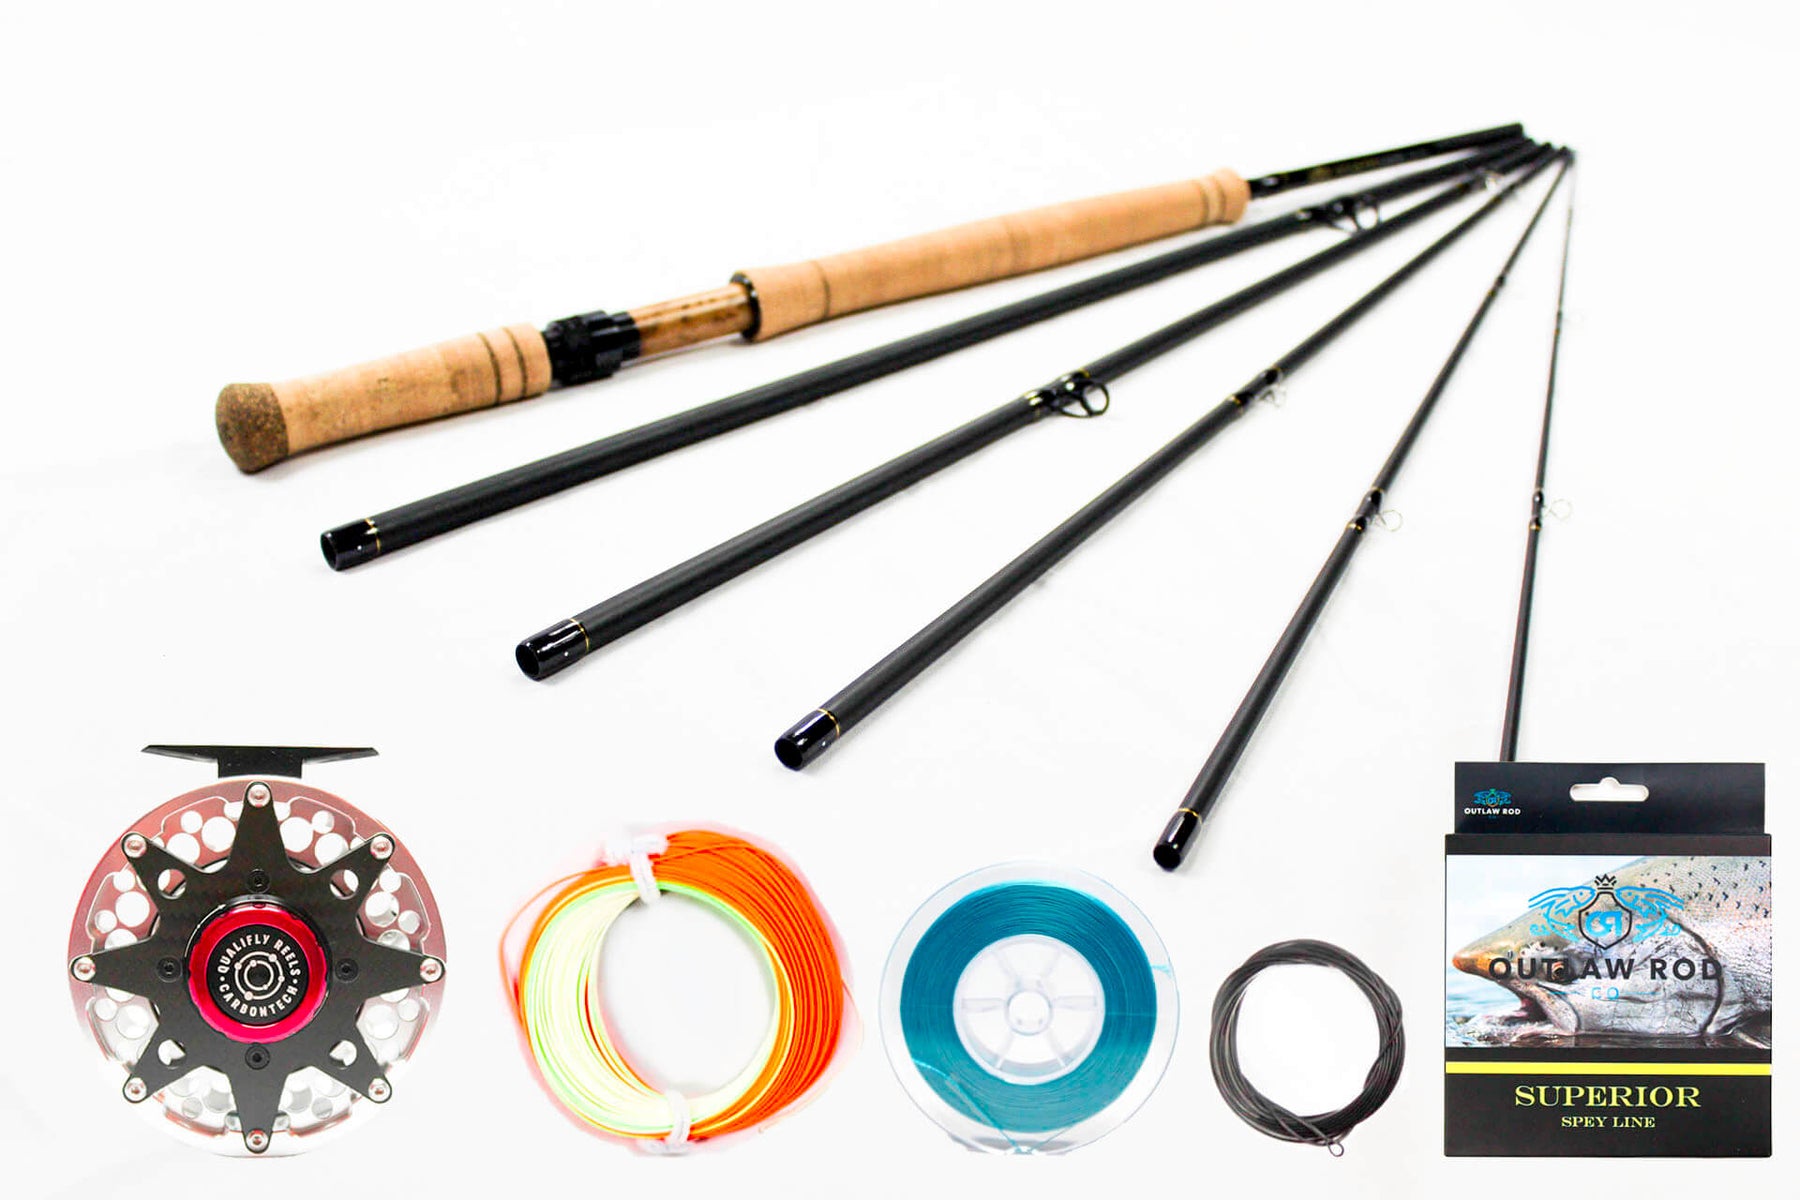 9wt 14ft M-Series (Spey Rod) and Oversized 11-12wt Qualifly